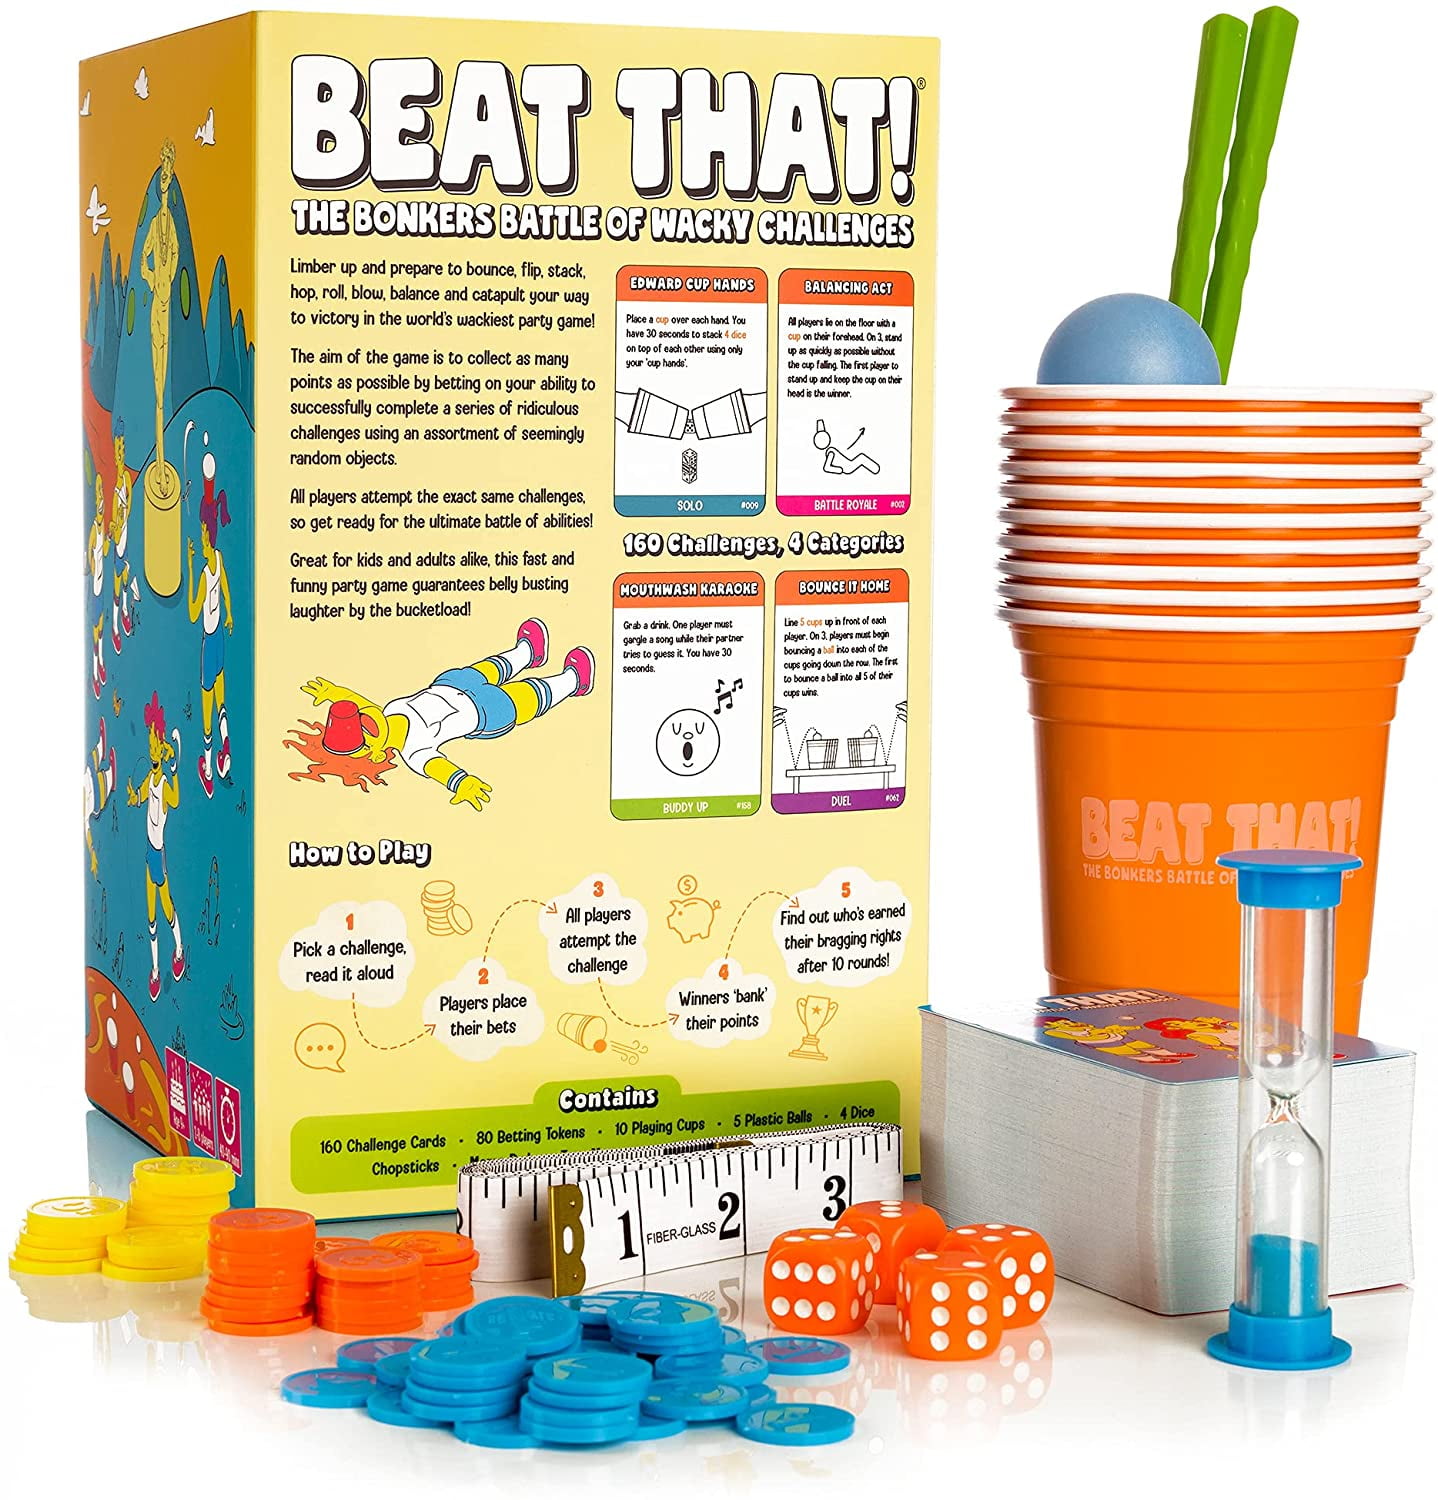 Beat - The Bonkers Battle of Wacky Challenges [Family Party Game for & Adults] - Walmart.com